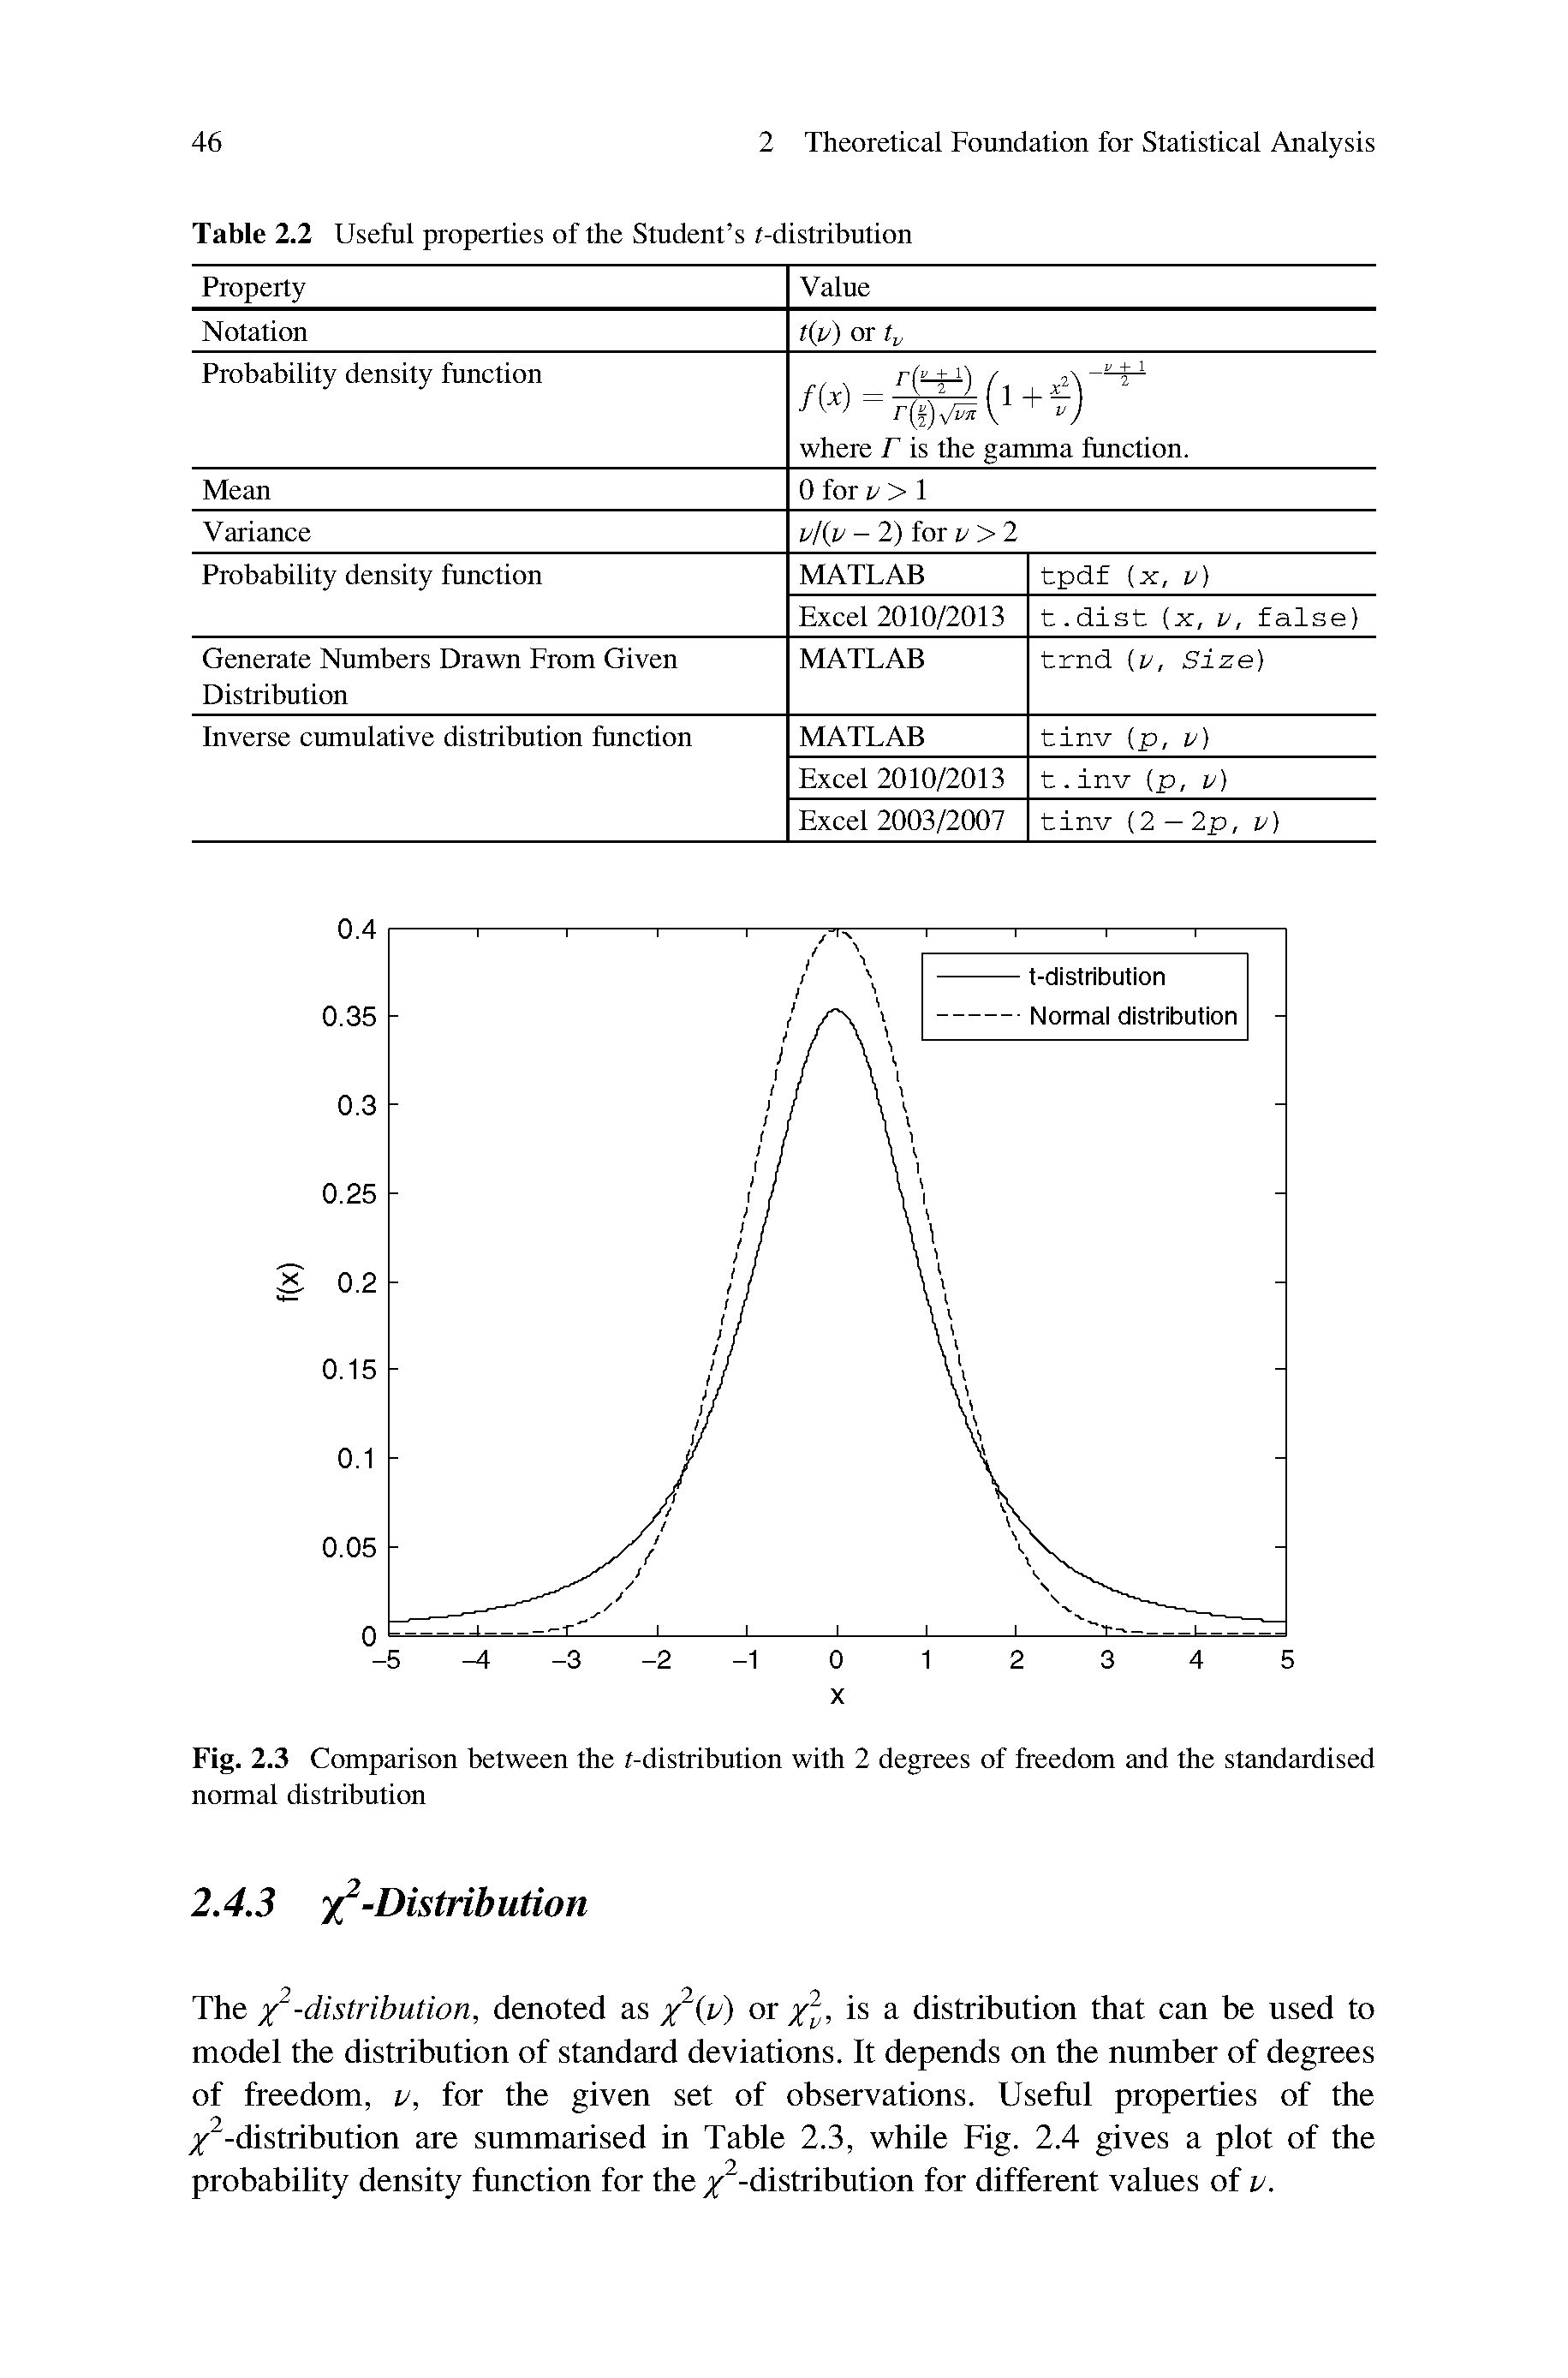 Fig. 2.3 Comparison between the t-distribution with 2 degrees of freedom and the standardised normal distribution...